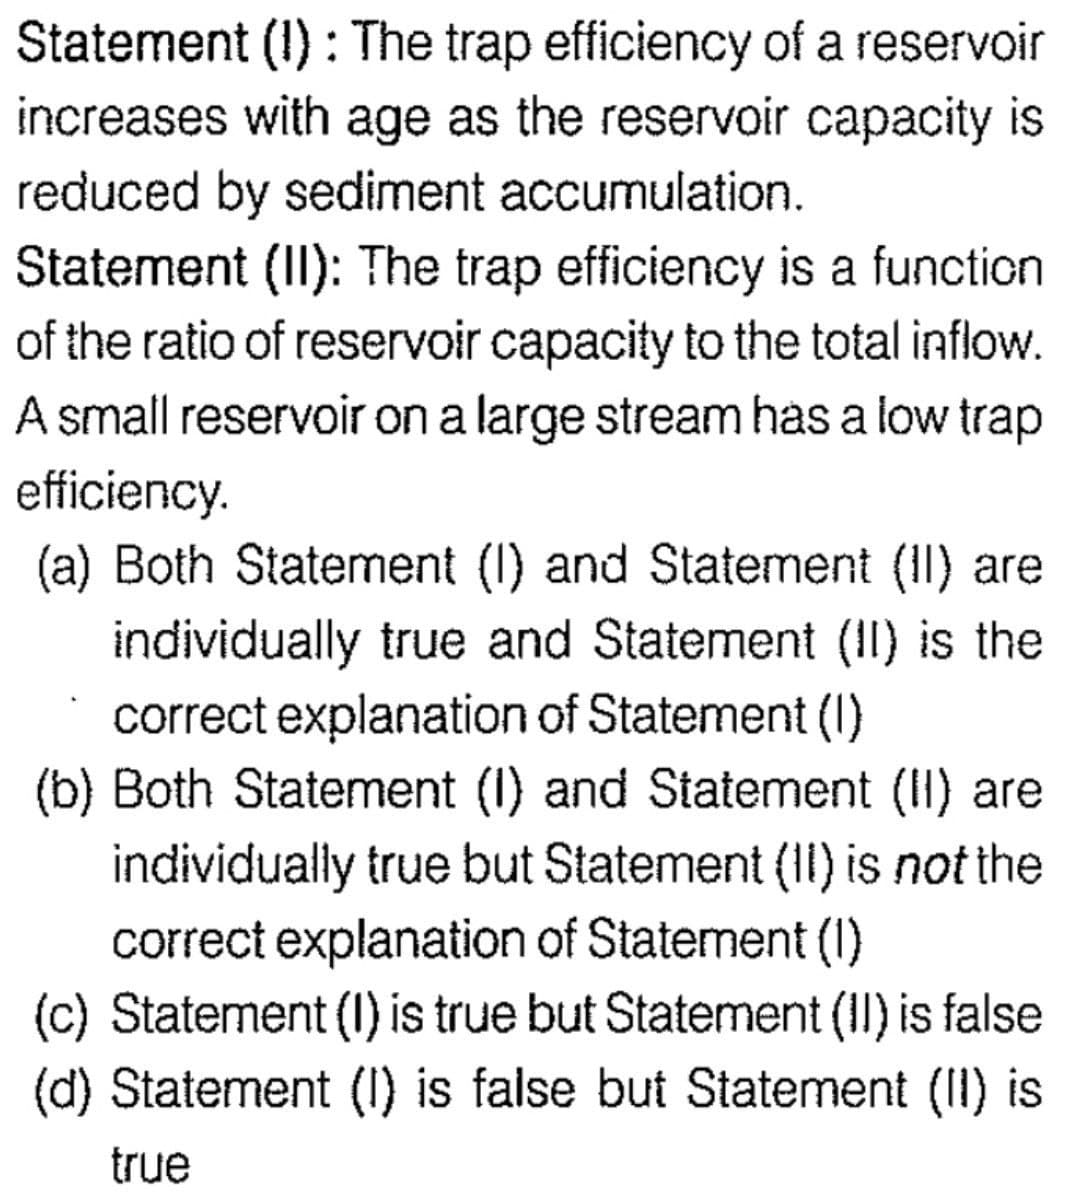 Statement (1): The trap efficiency of a reservoir
increases with age as the reservoir capacity is
reduced by sediment accumulation.
Statement (II): The trap efficiency is a function
of the ratio of reservoir capacity to the total inflow.
A small reservoir on a large stream has a low trap
efficiency.
(a) Both Statement (1) and Statement (II) are
individually true and Statement (II) is the
correct explanation of Statement (1)
(b) Both Statement (1) and Statement (II) are
individually true but Statement (II) is not the
correct explanation of Statement (1)
(c) Statement (I) is true but Statement (II) is false
(d) Statement (1) is false but Statement (II) is
true